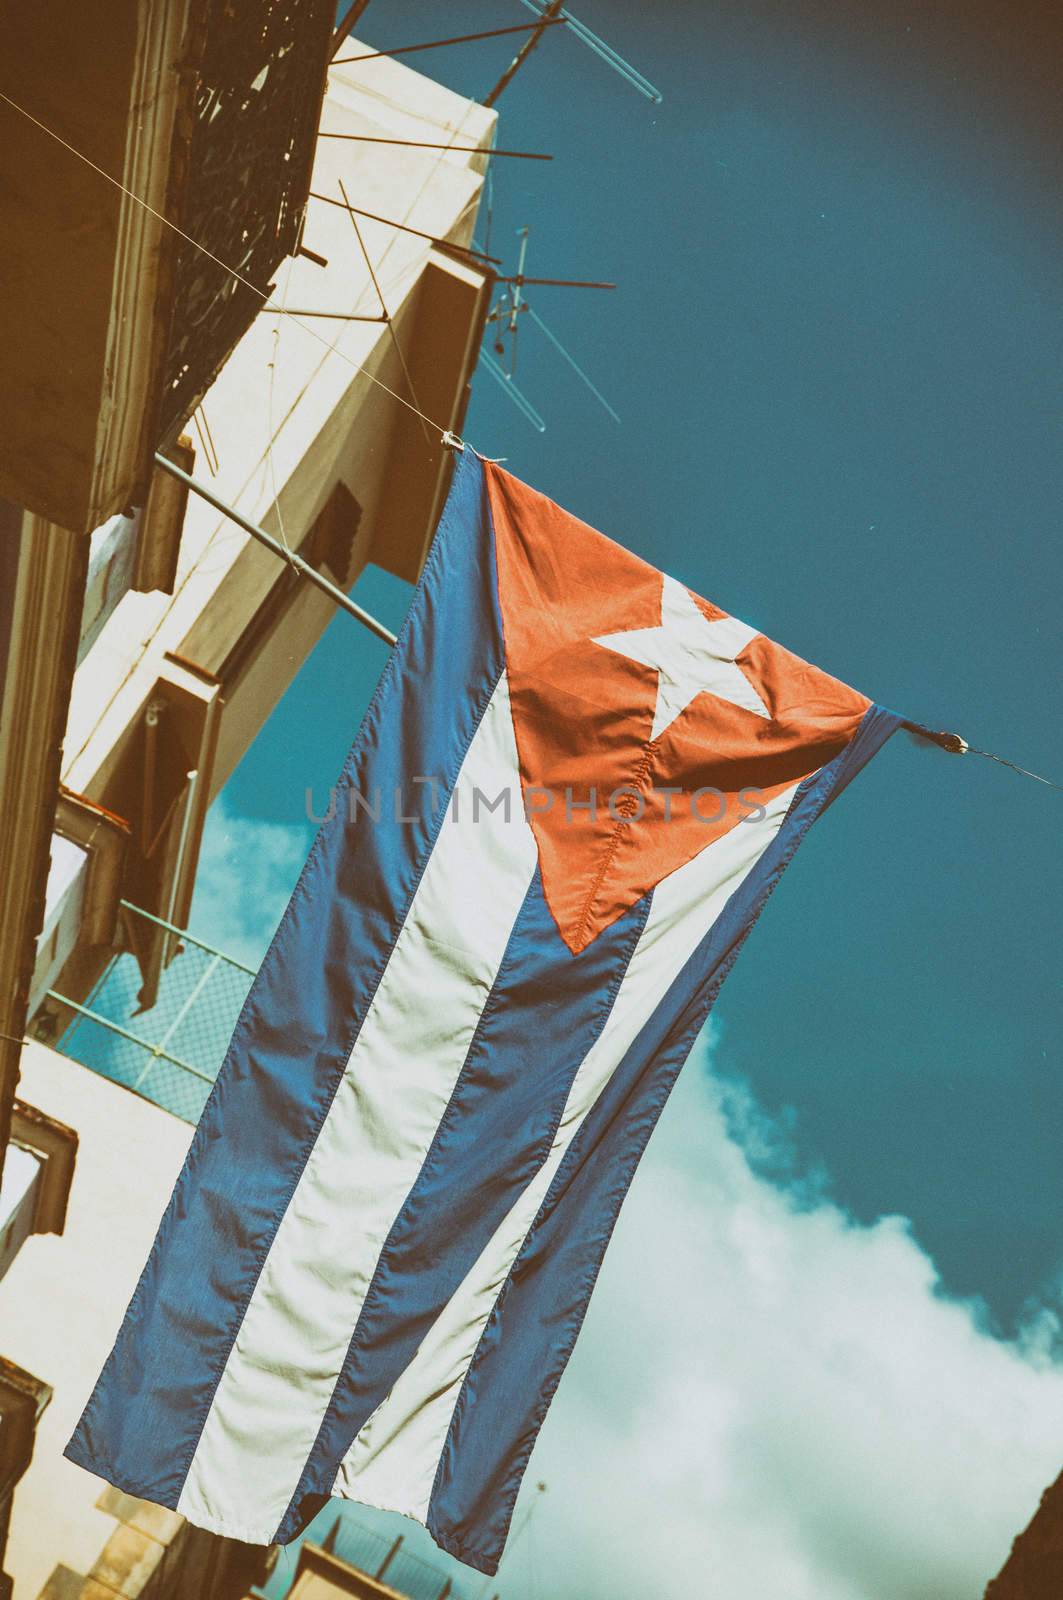 Cuban flag in old Havana building by rgbspace